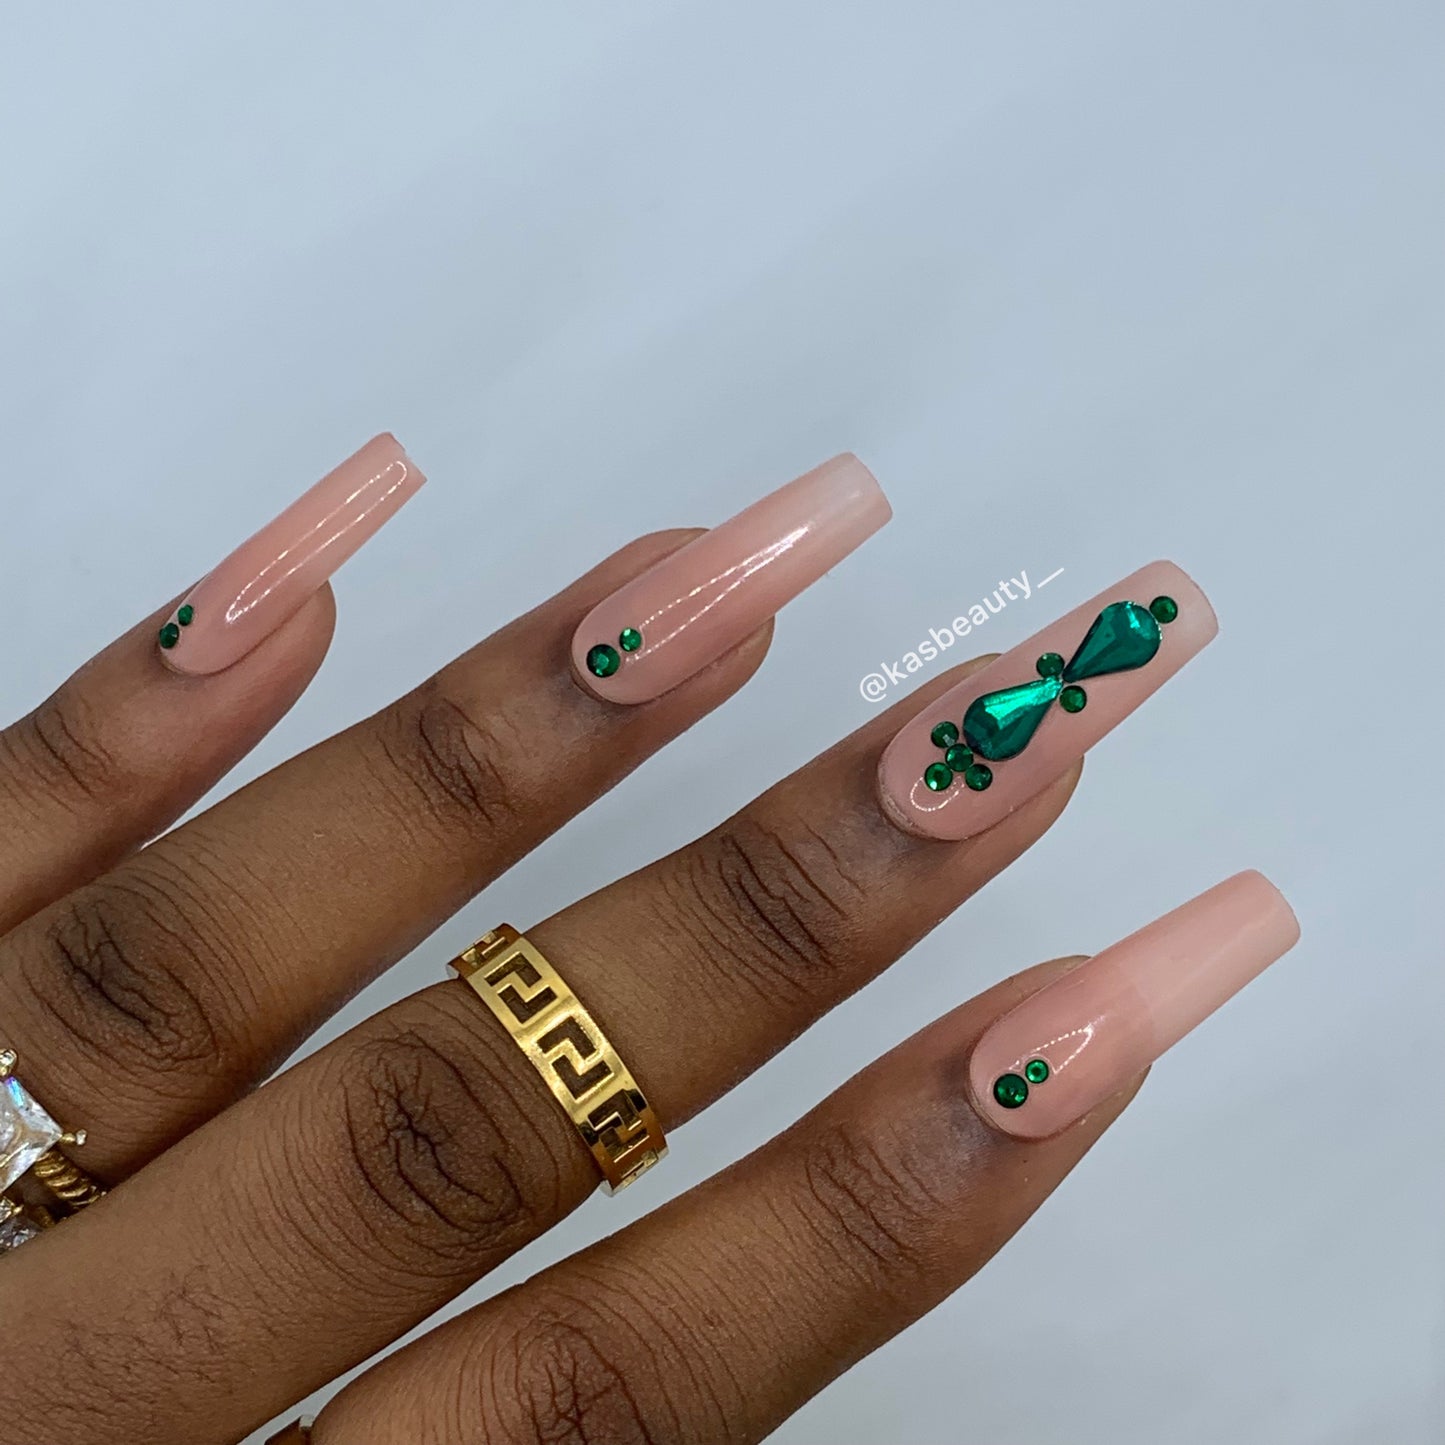 Minted Press On Nails